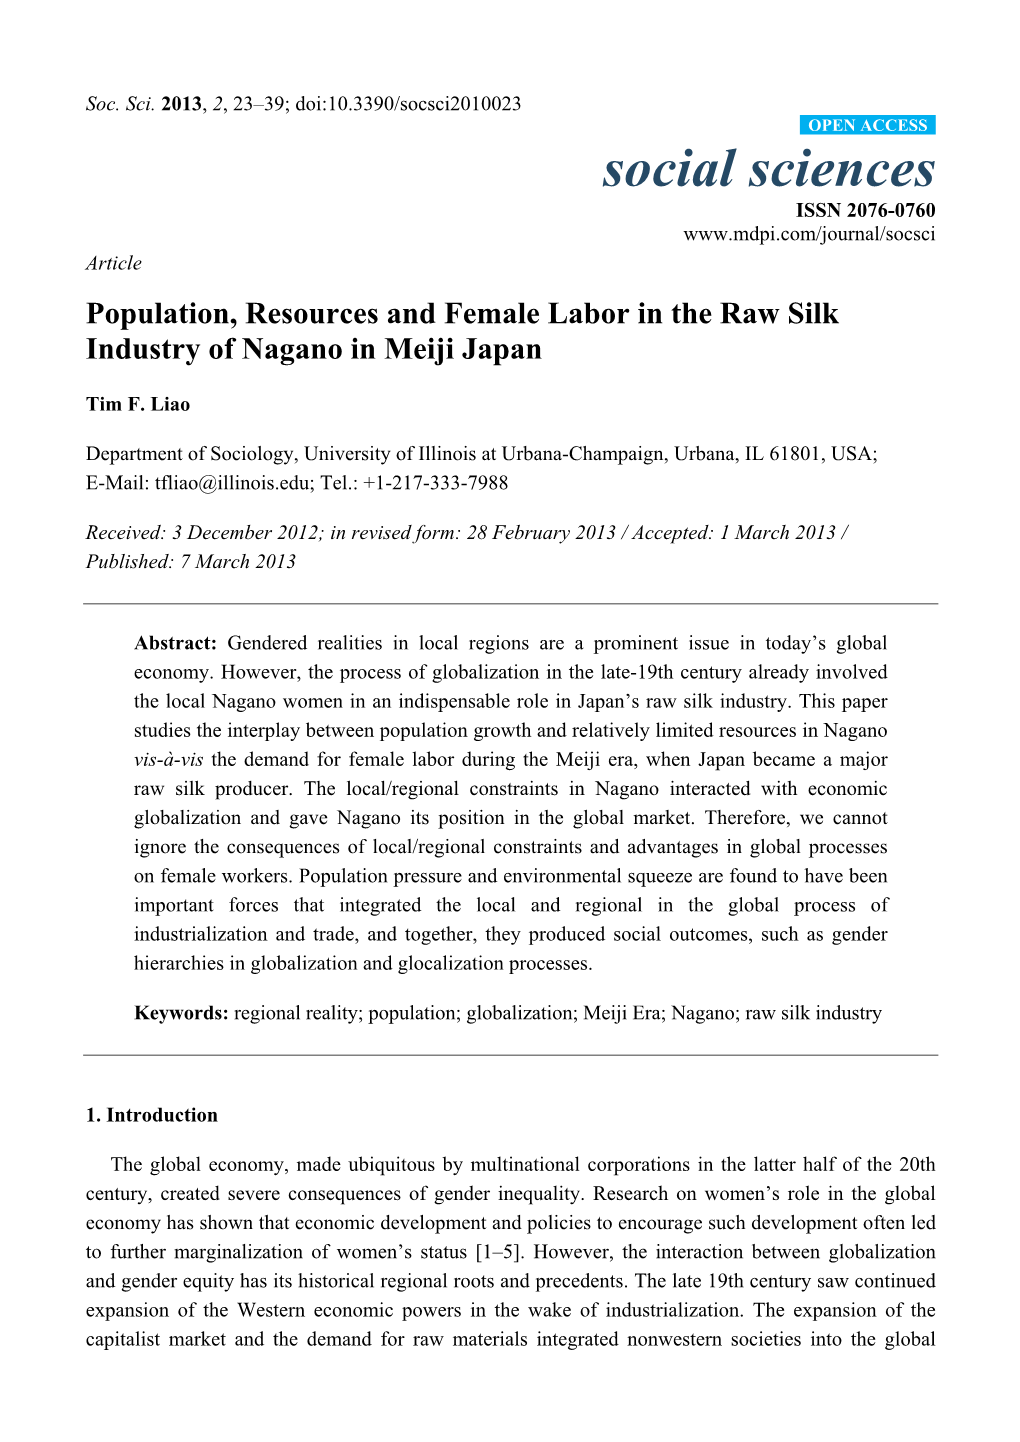 Population, Resources and Female Labor in the Raw Silk Industry of Nagano in Meiji Japan